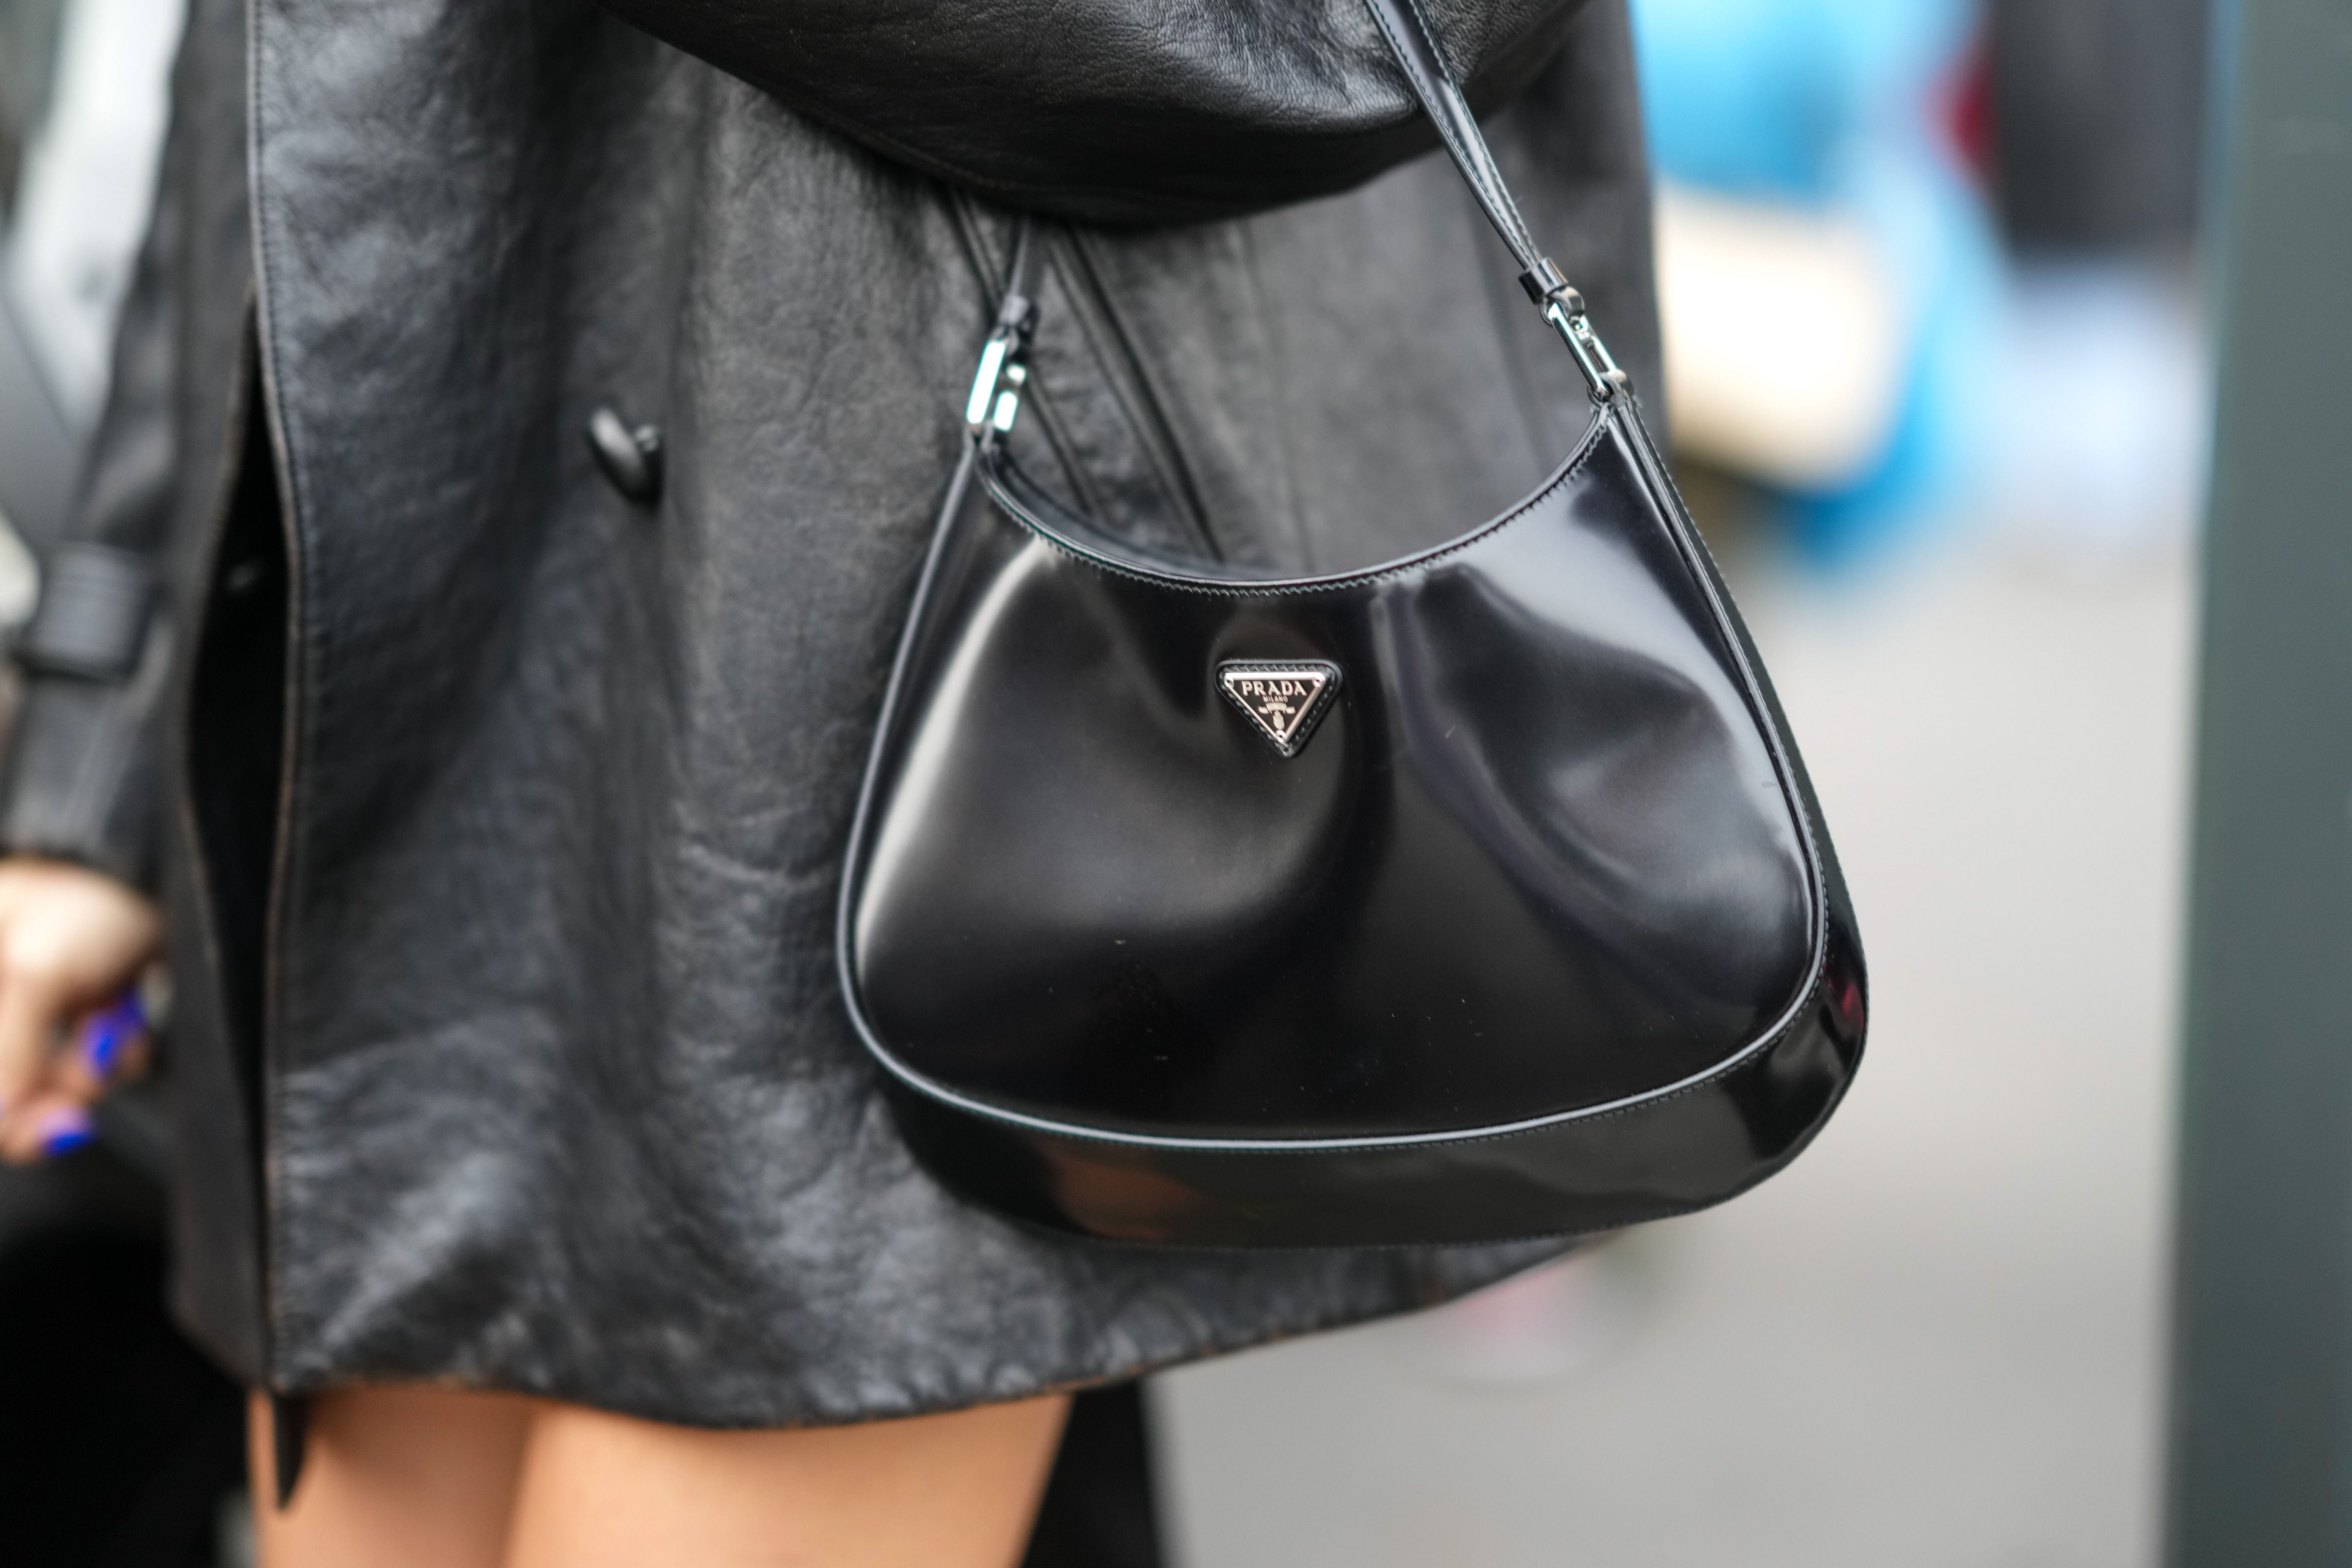 Prada Nylon Bag Dupes - ALLINSTYLE - Your source fashion news & styling tips